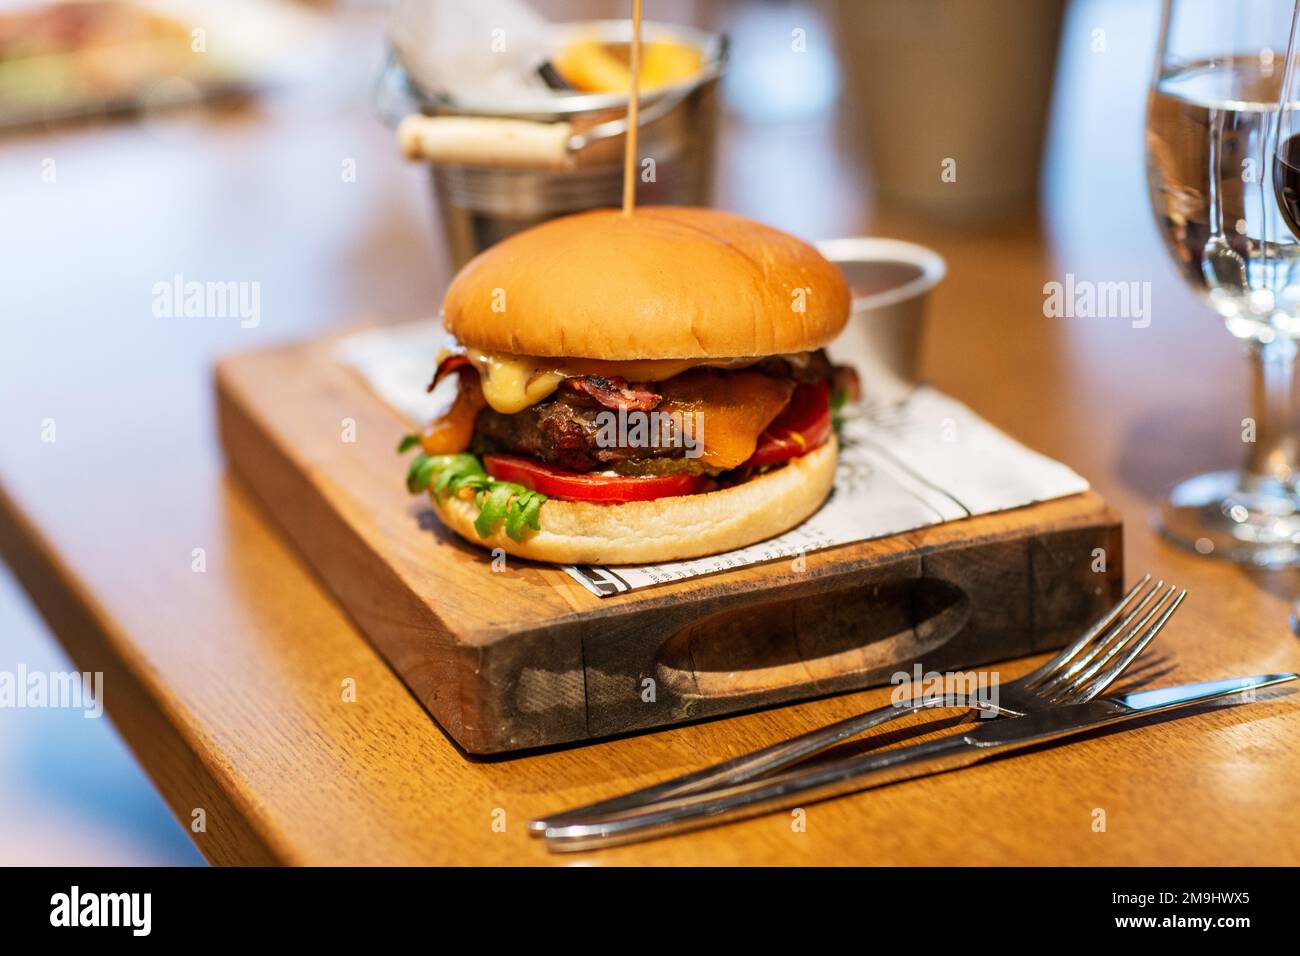 close up of burger on wooden board at restaurant Stock Photo